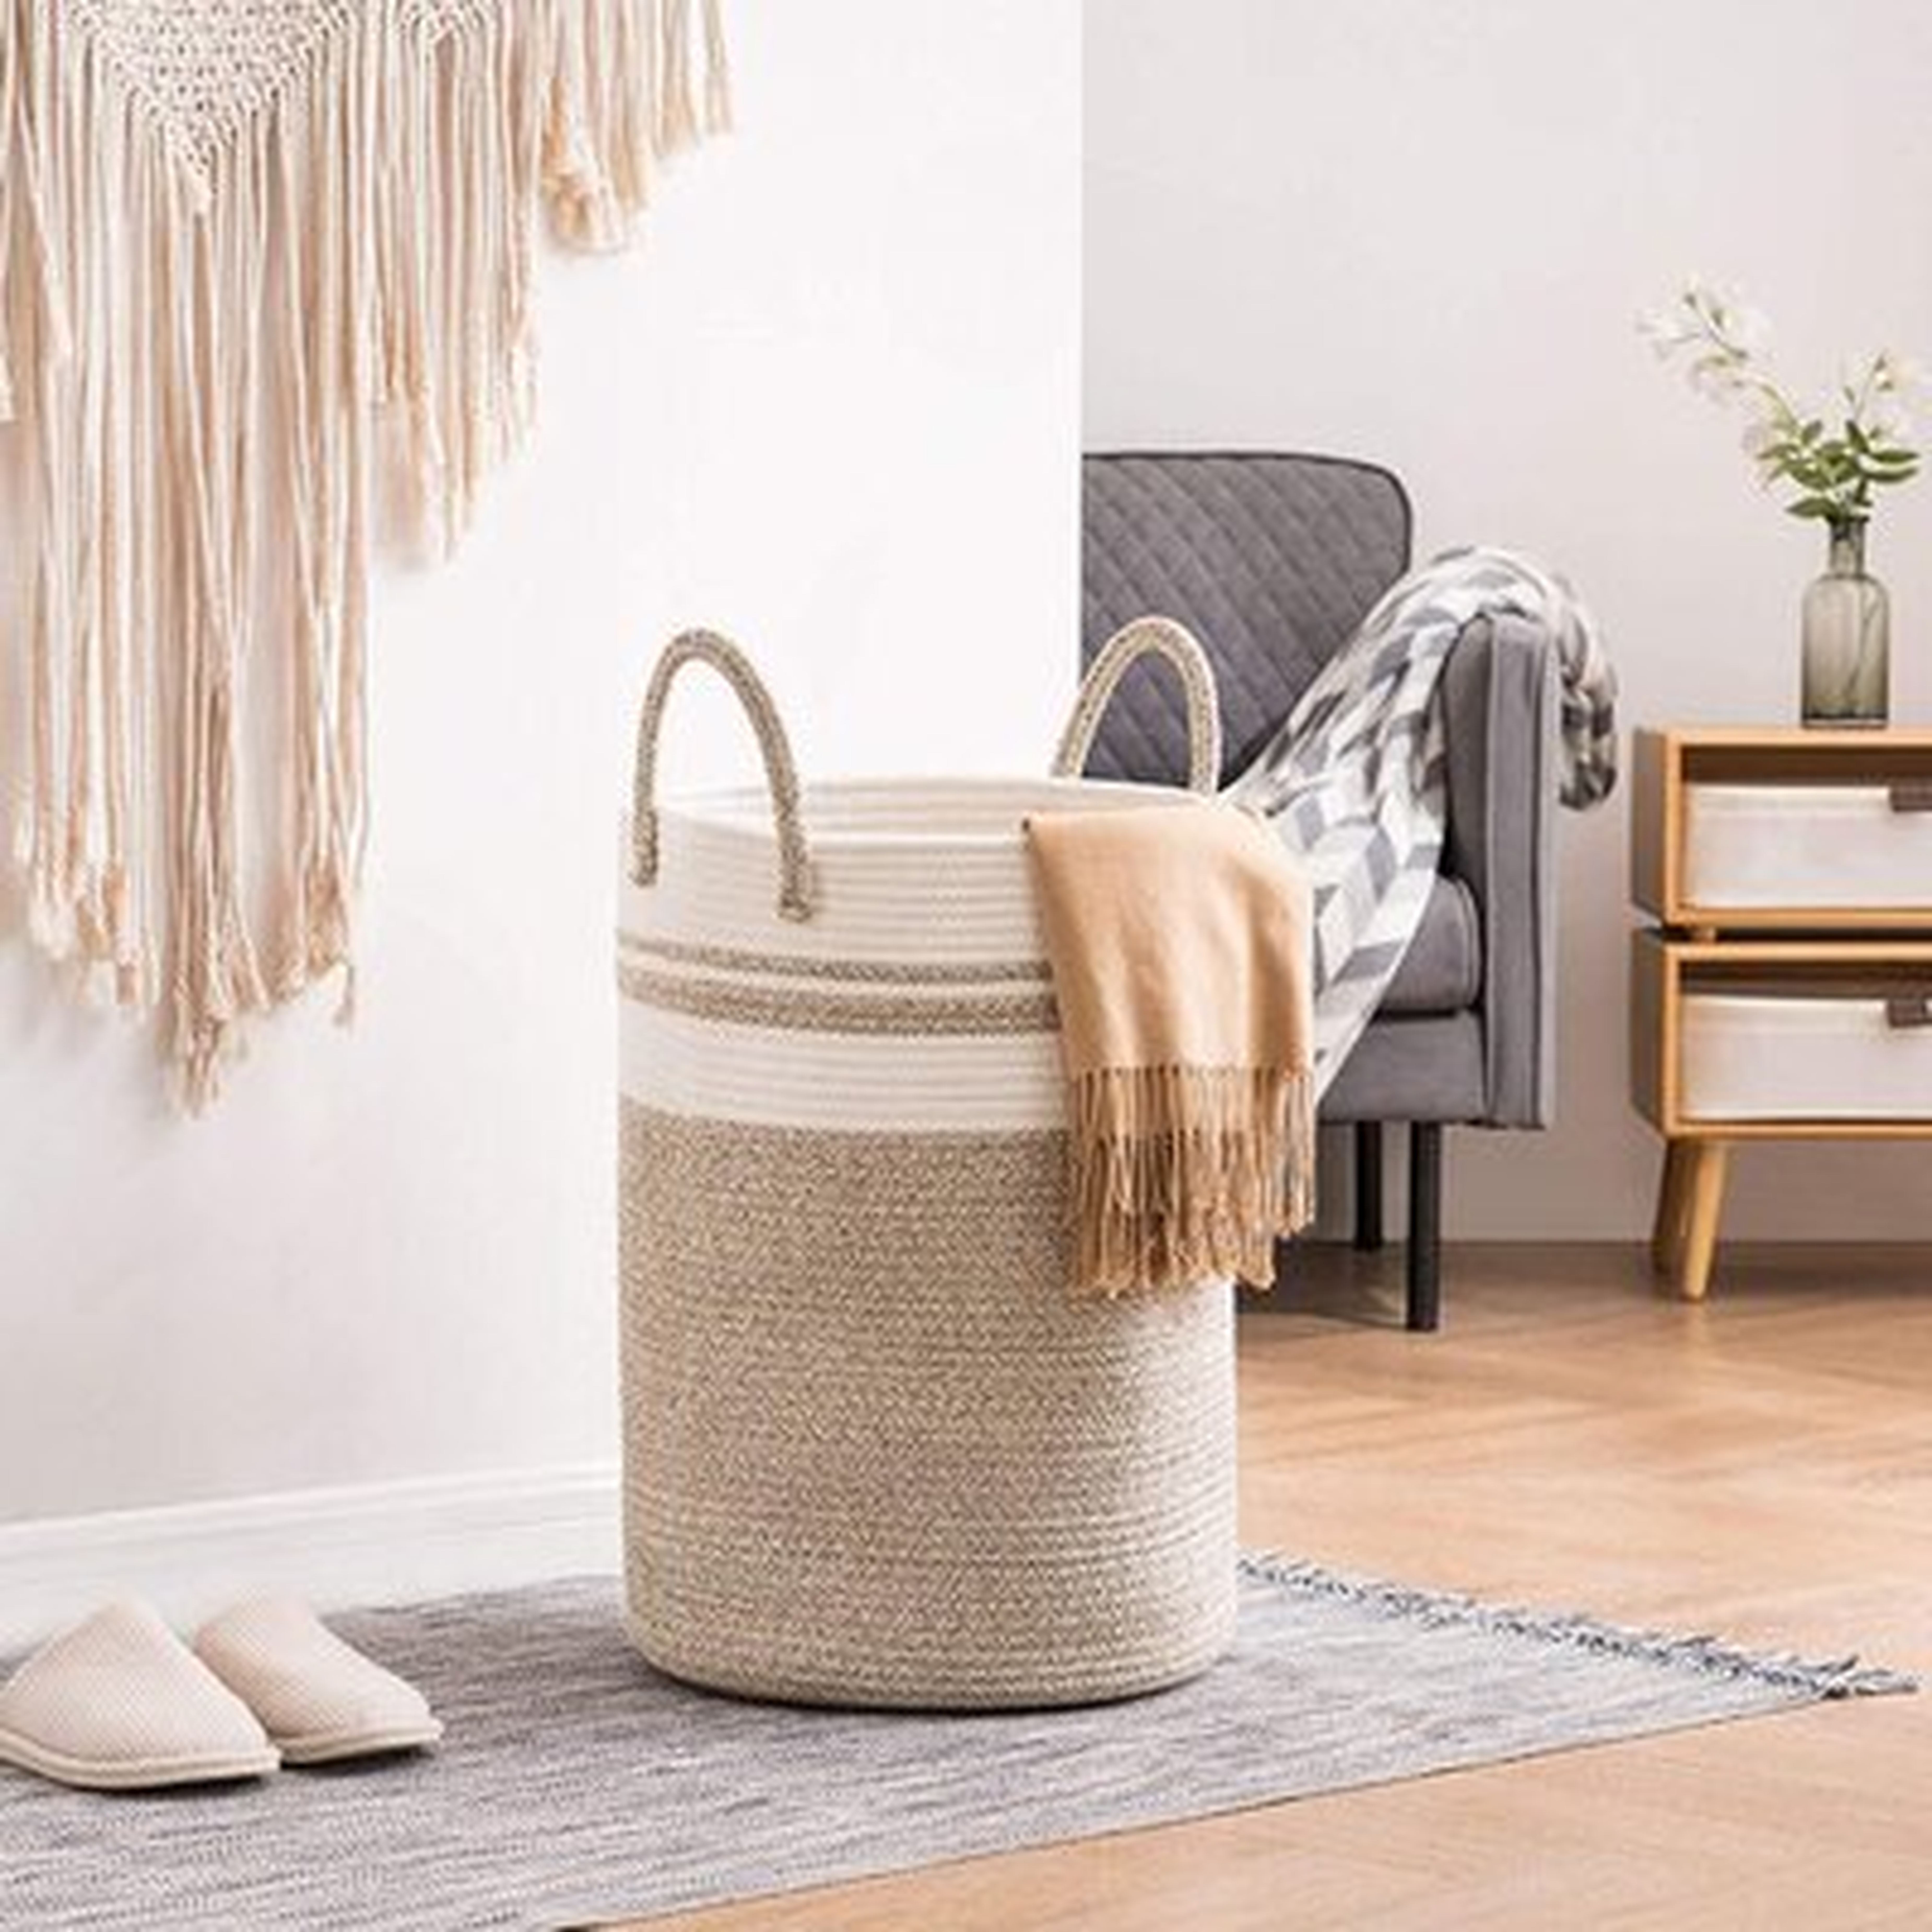 Woven Rope Laundry Hamper With Handles, Tall Laundry Basket For Blanket Storage, Heavy Duty Clothes Hamper For Bedroom - Wayfair